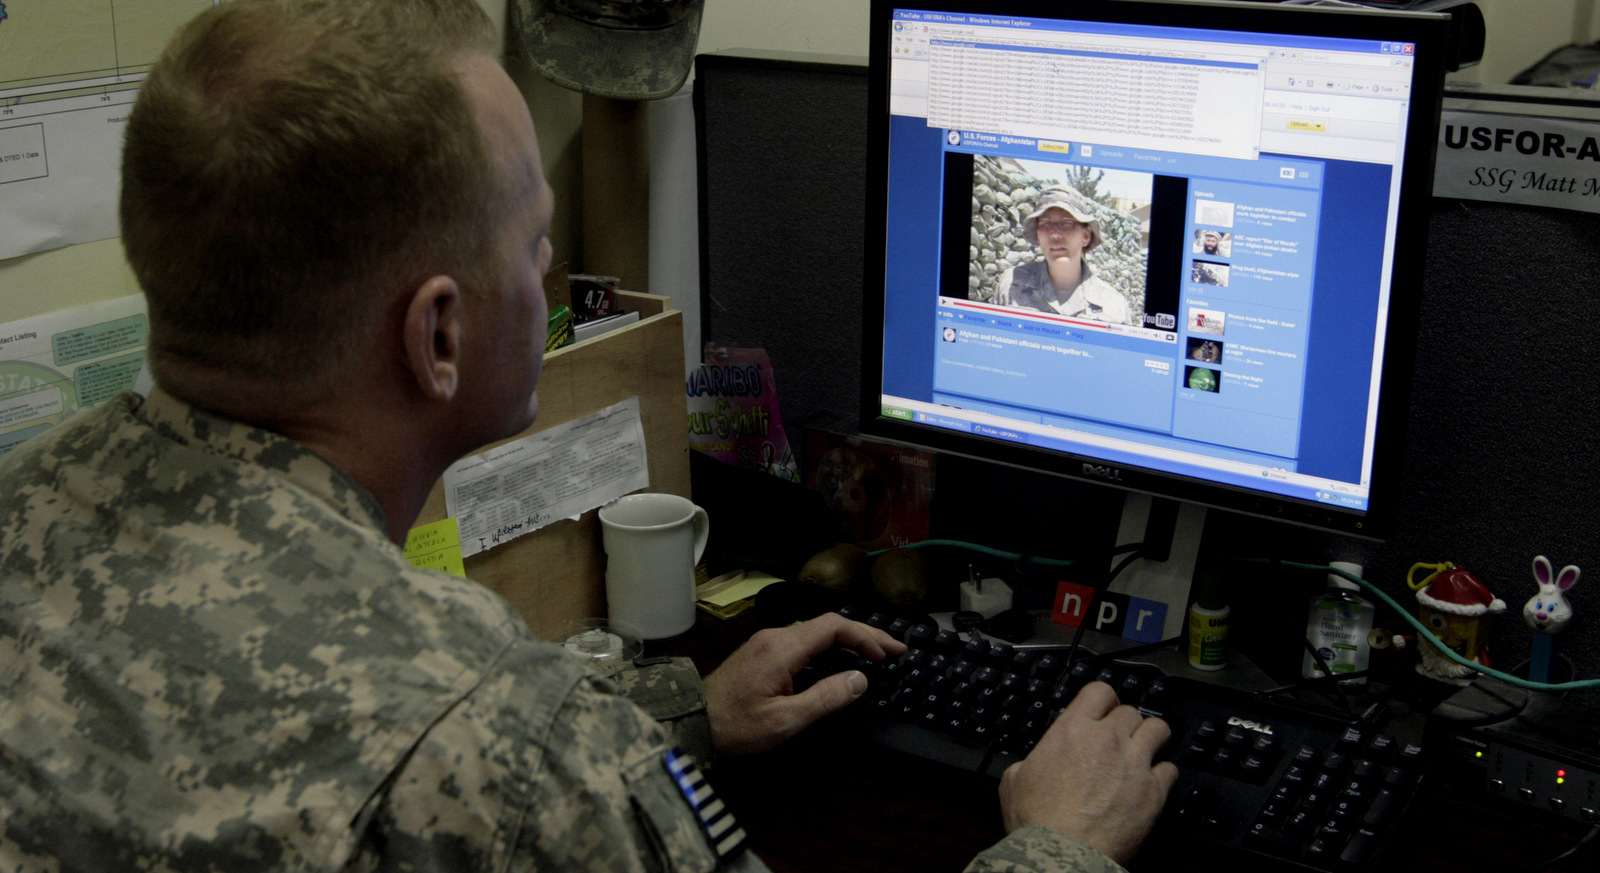 Army Staff Sgt. Matthew Millham, 31, from New Paltz, N.Y., a former reporter for the military newspaper Stars and Stripes, checks a Facebook site in Kabul, Afghanistan as part of a new communications effort to reach a non-newspaper reading Internet audience. (AP/Musadeq Sadeq)